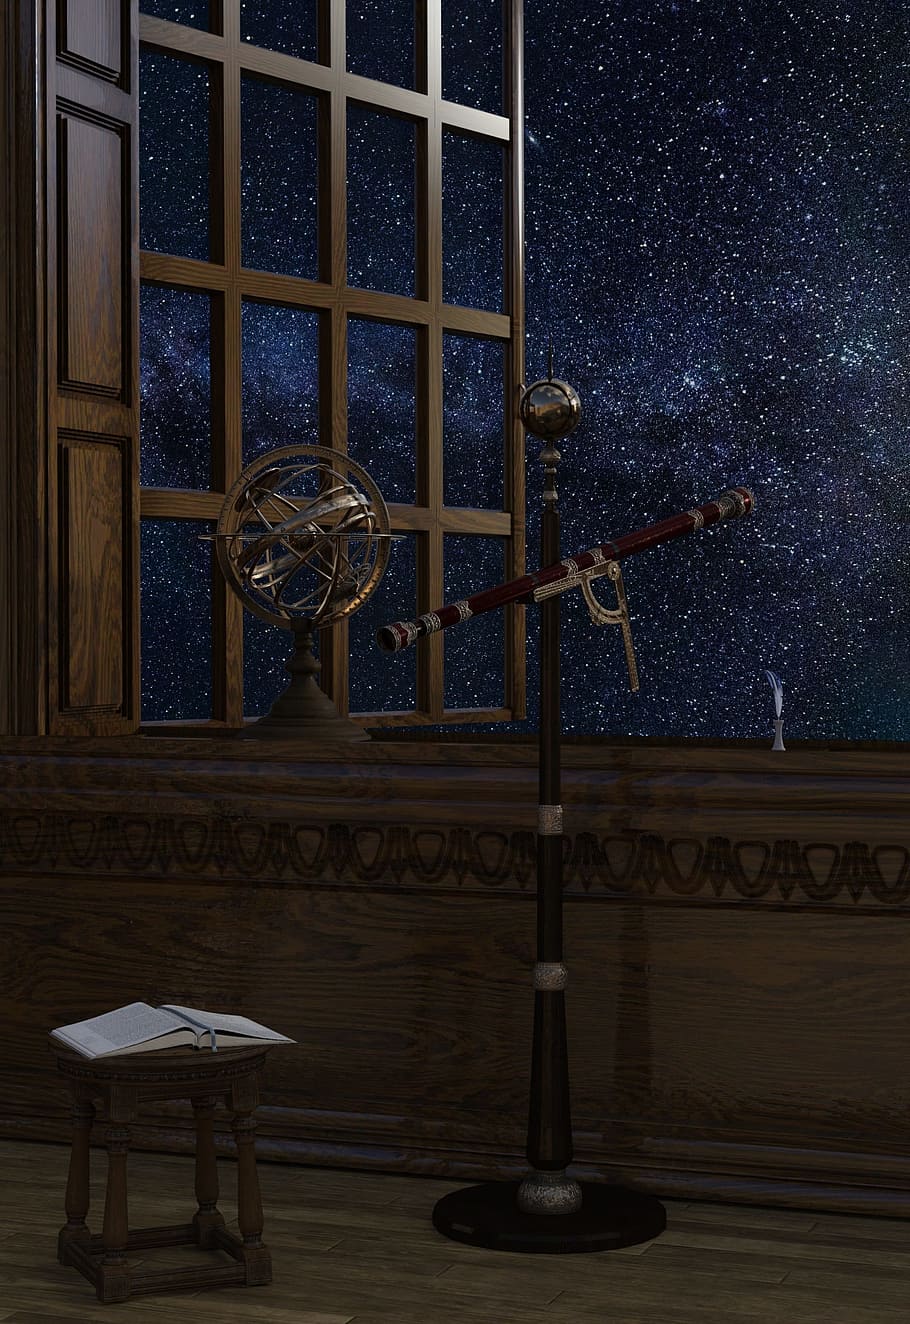 telescope, astrology, astronomy, cosmos, space, middle ages, star, constellation, old, window